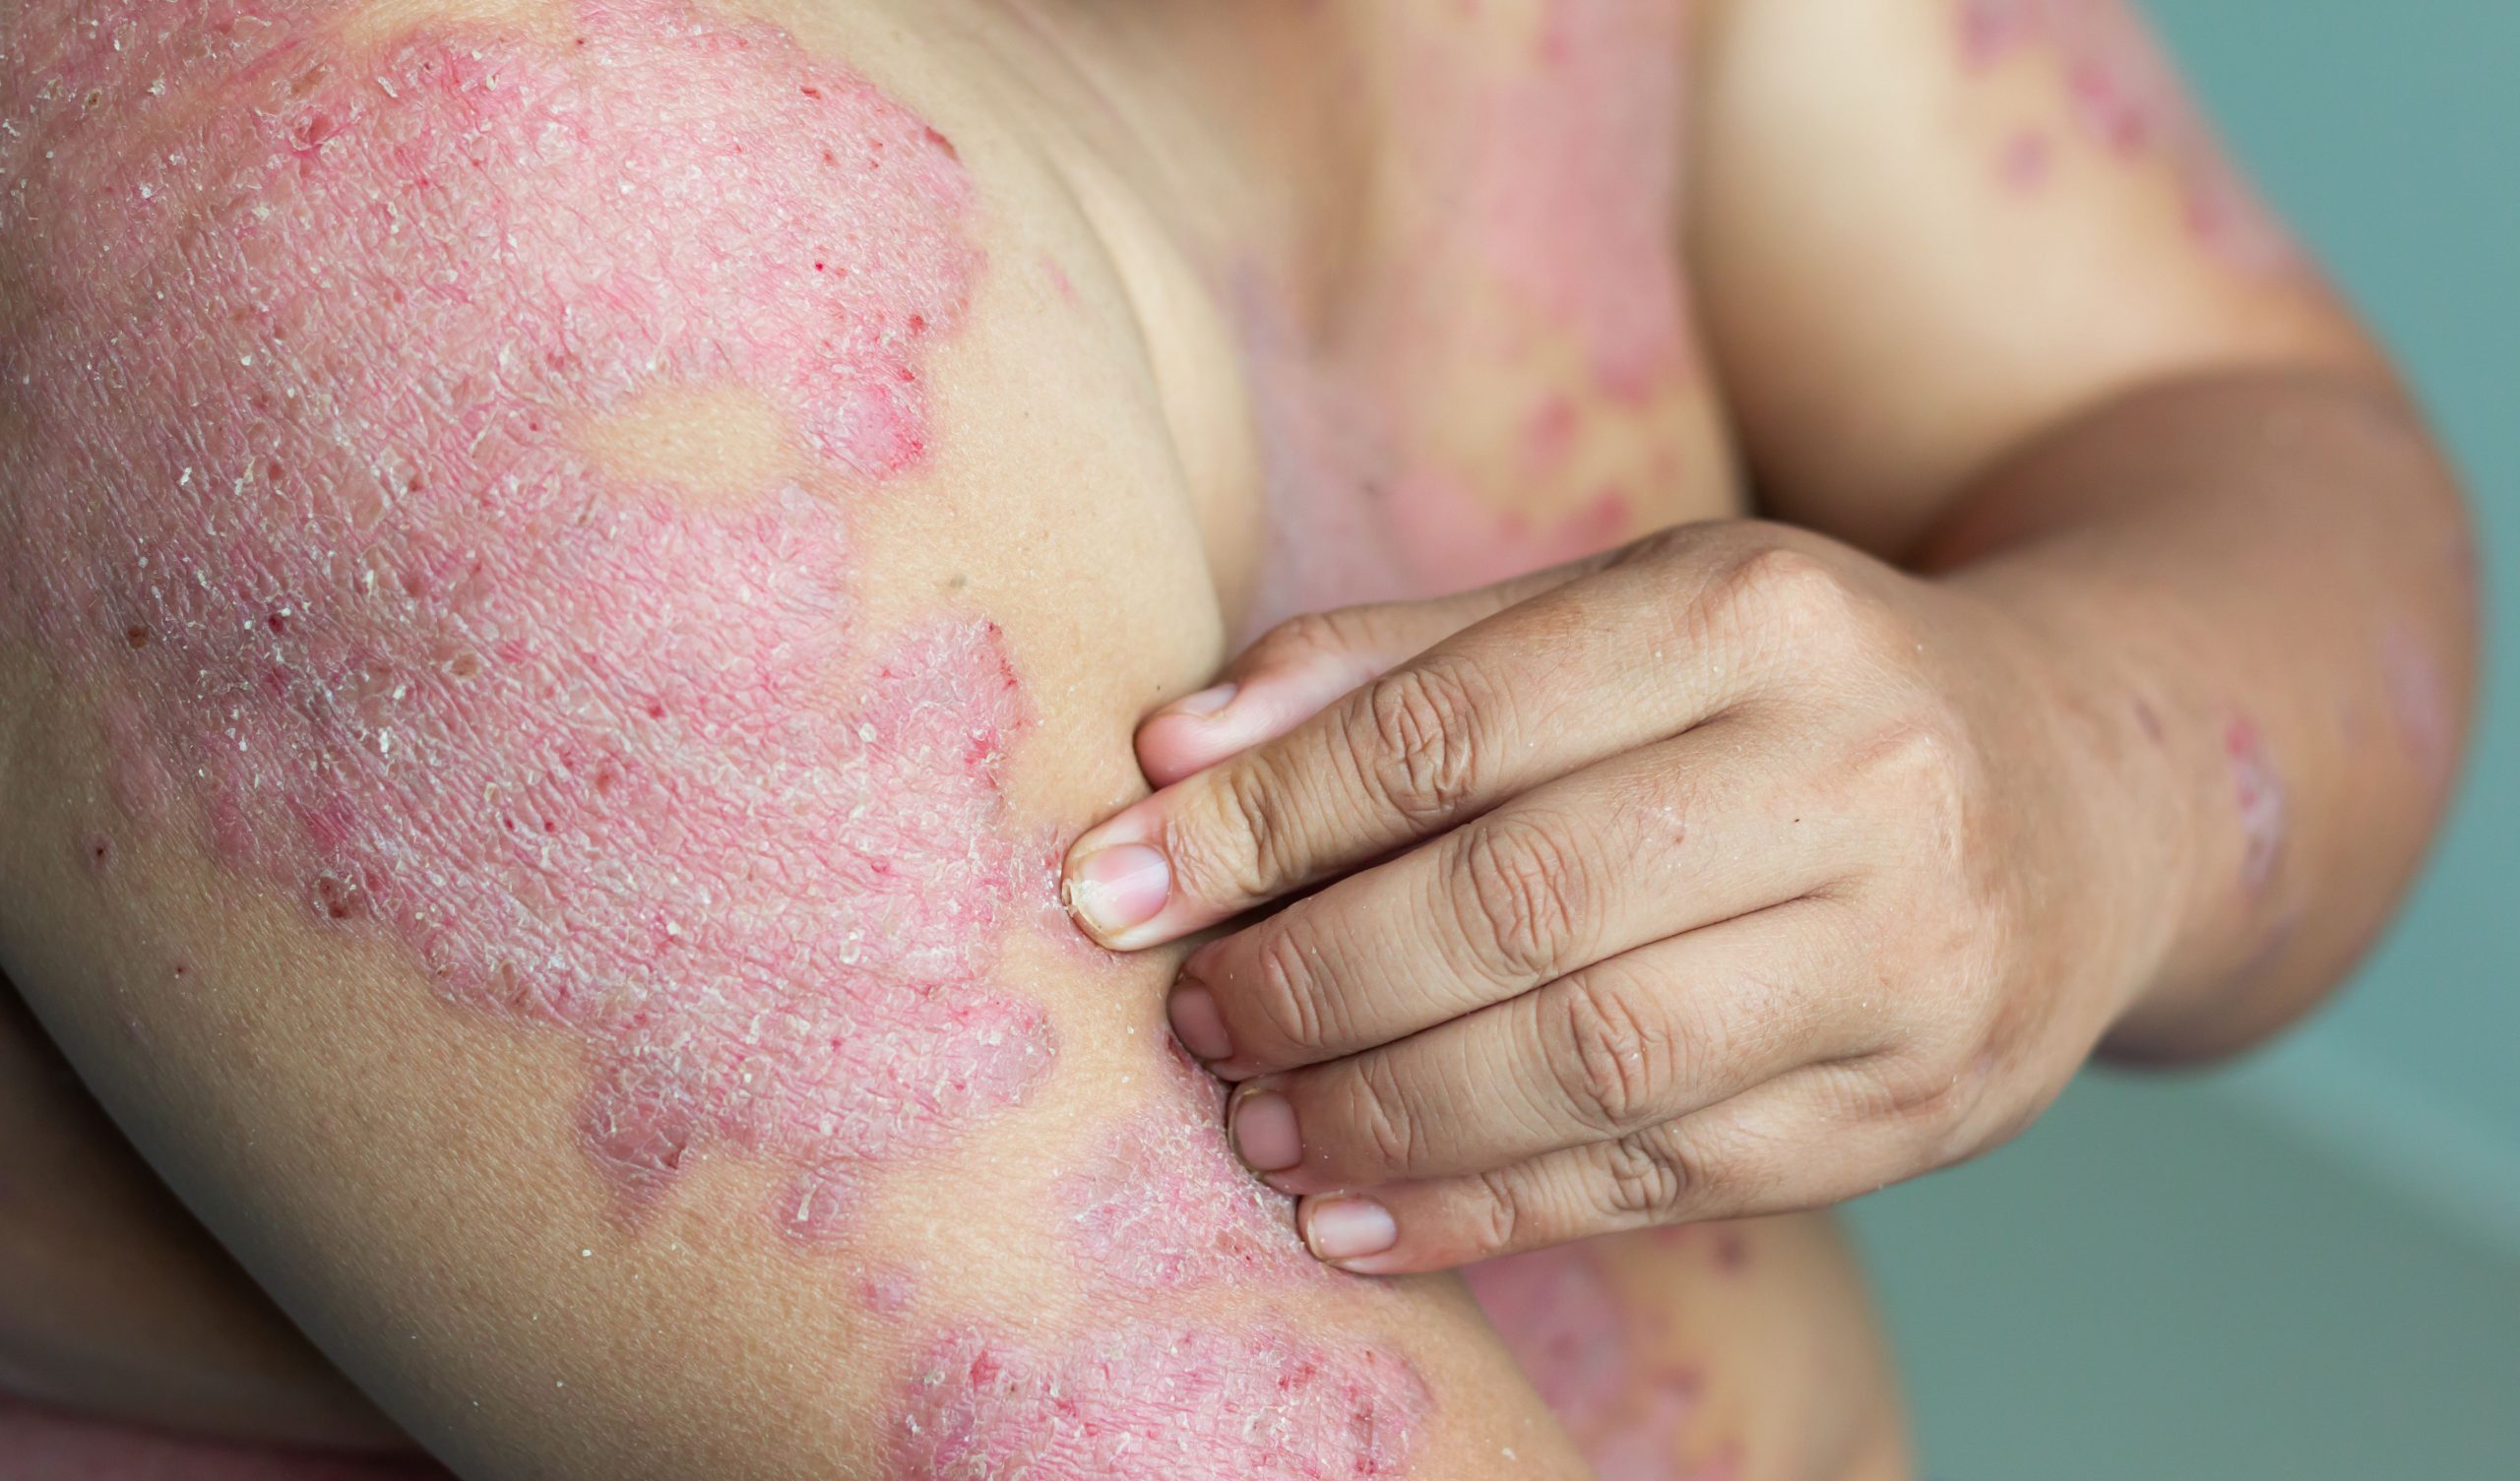 Biologics make psoriasis clearance a real possibility ...